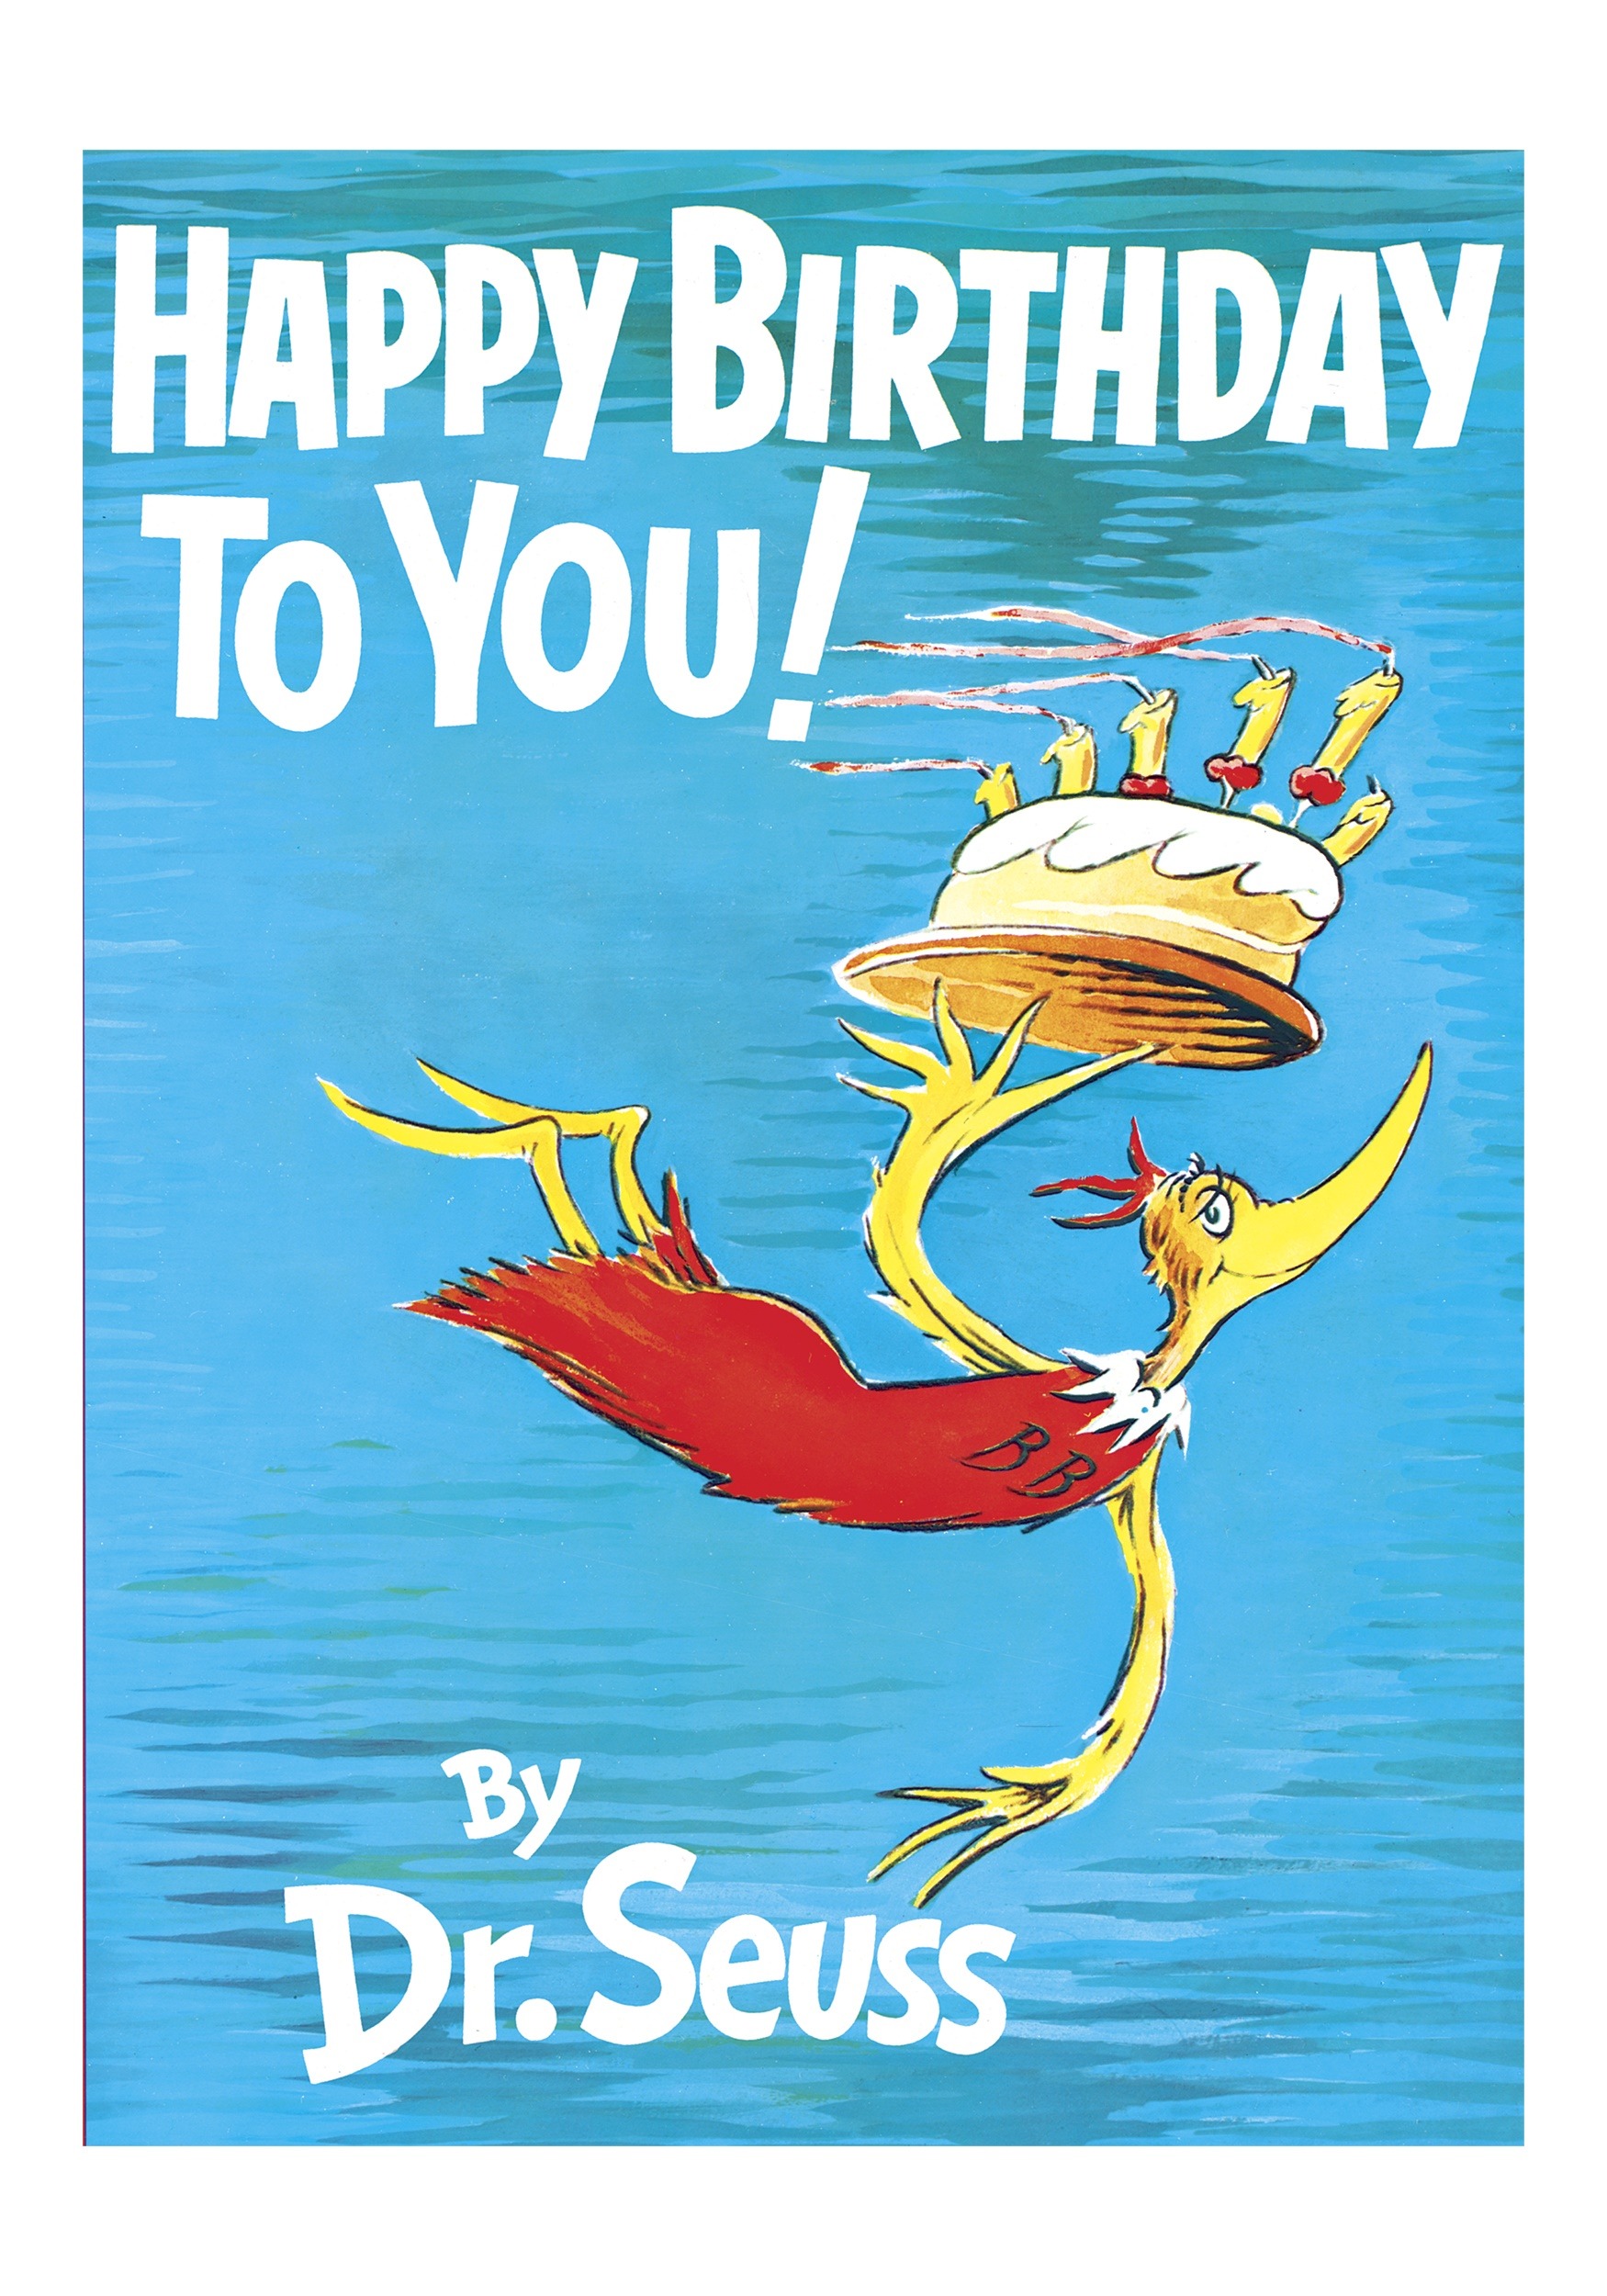 Hardcover: Happy Birthday to You! By Dr. Seuss